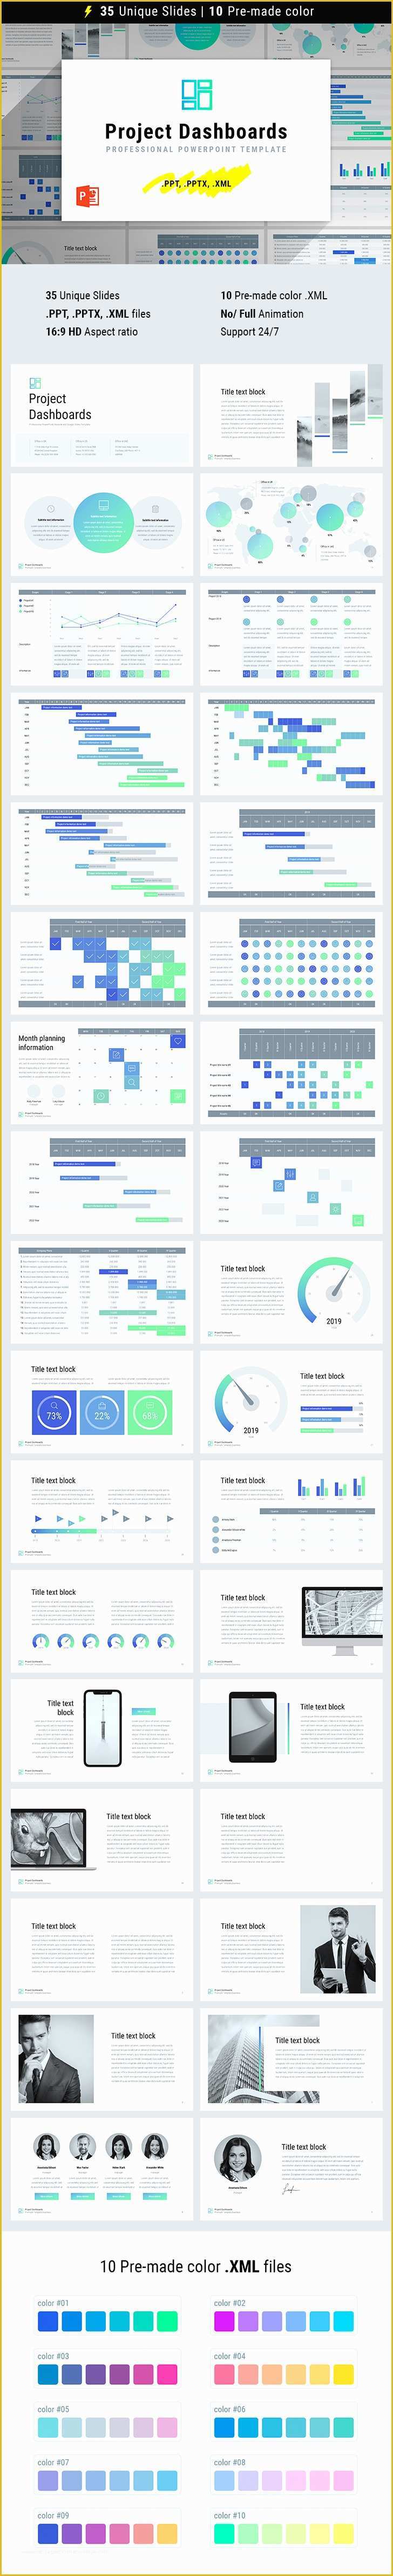 Powerpoint Dashboard Template Free Of Project Dashboard Templates Powerpoint Download now